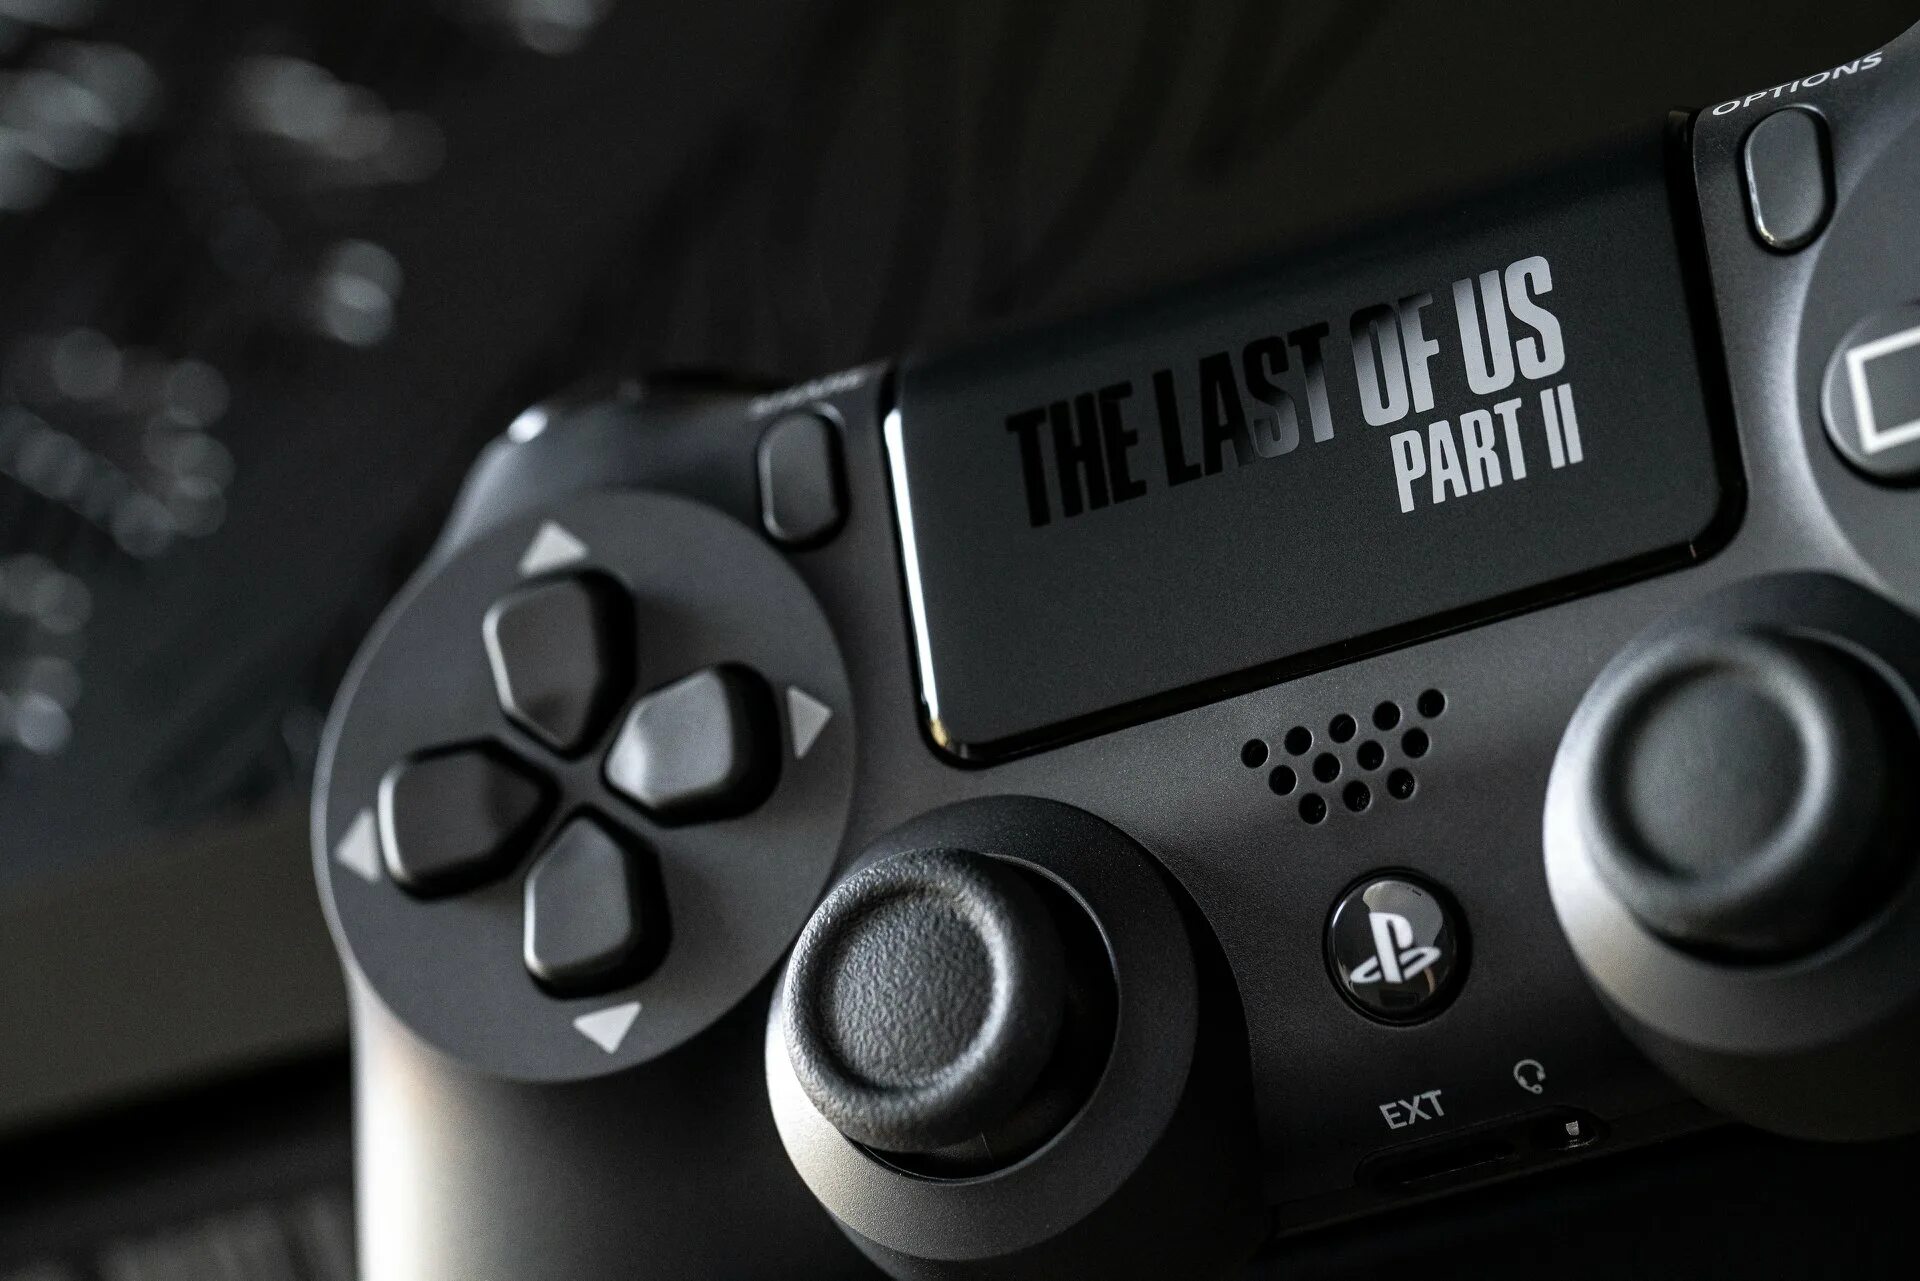 Ps4 the last of us 2 Limited Edition. Джойстик ps4 Limited Edition the last of us. PLAYSTATION 4 the last of us 2 Edition. Ps2 Limited Edition. Ps2 ps4